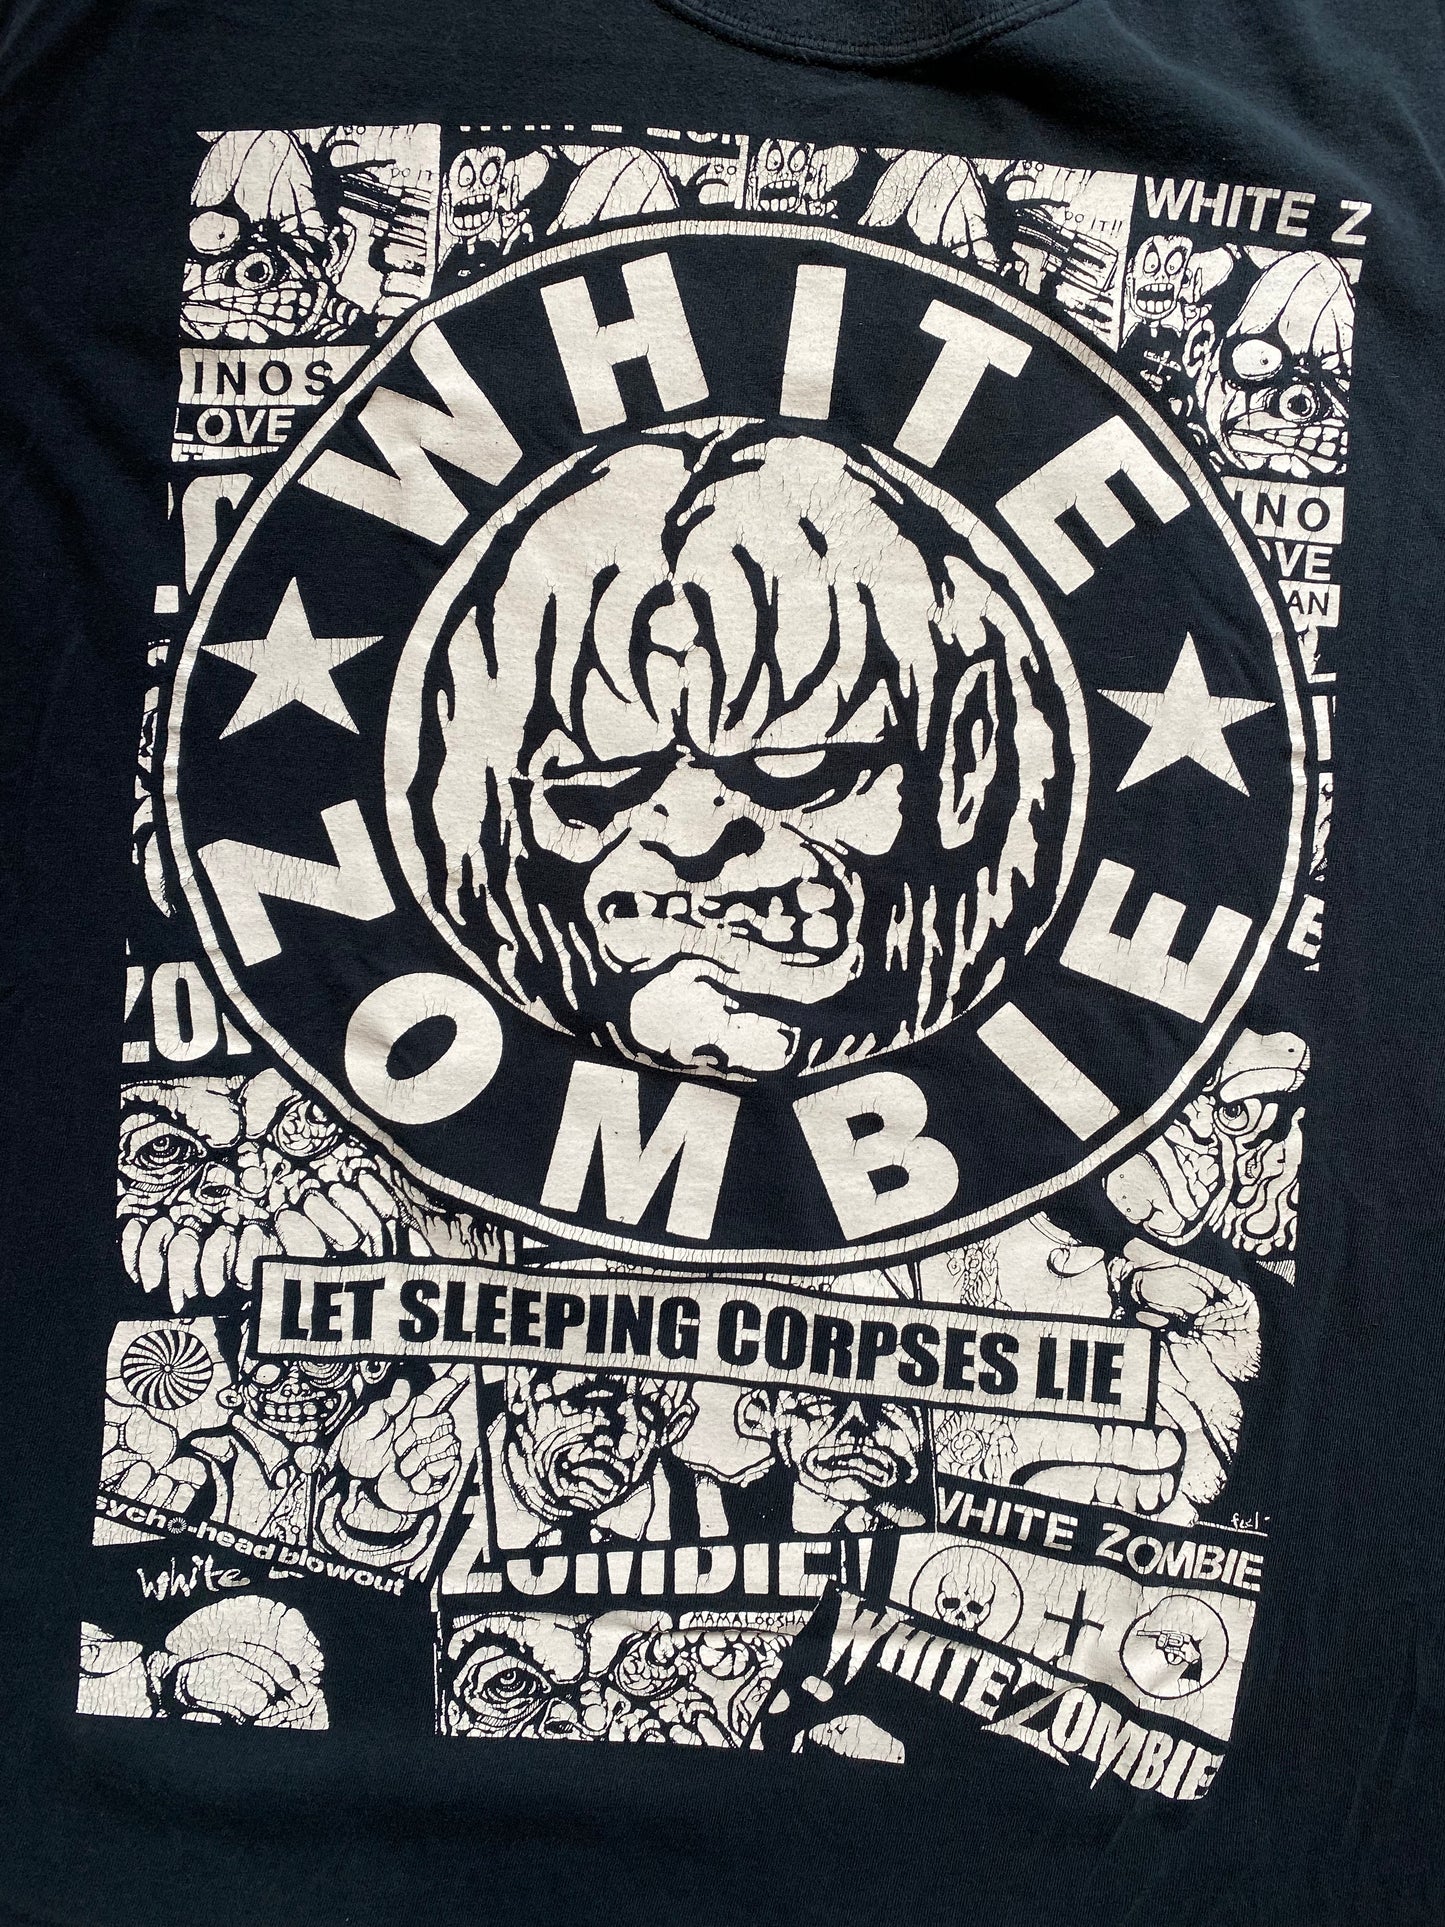 Vintage White Zombie “Let Sleeping Corpses Lie” T-Shirt